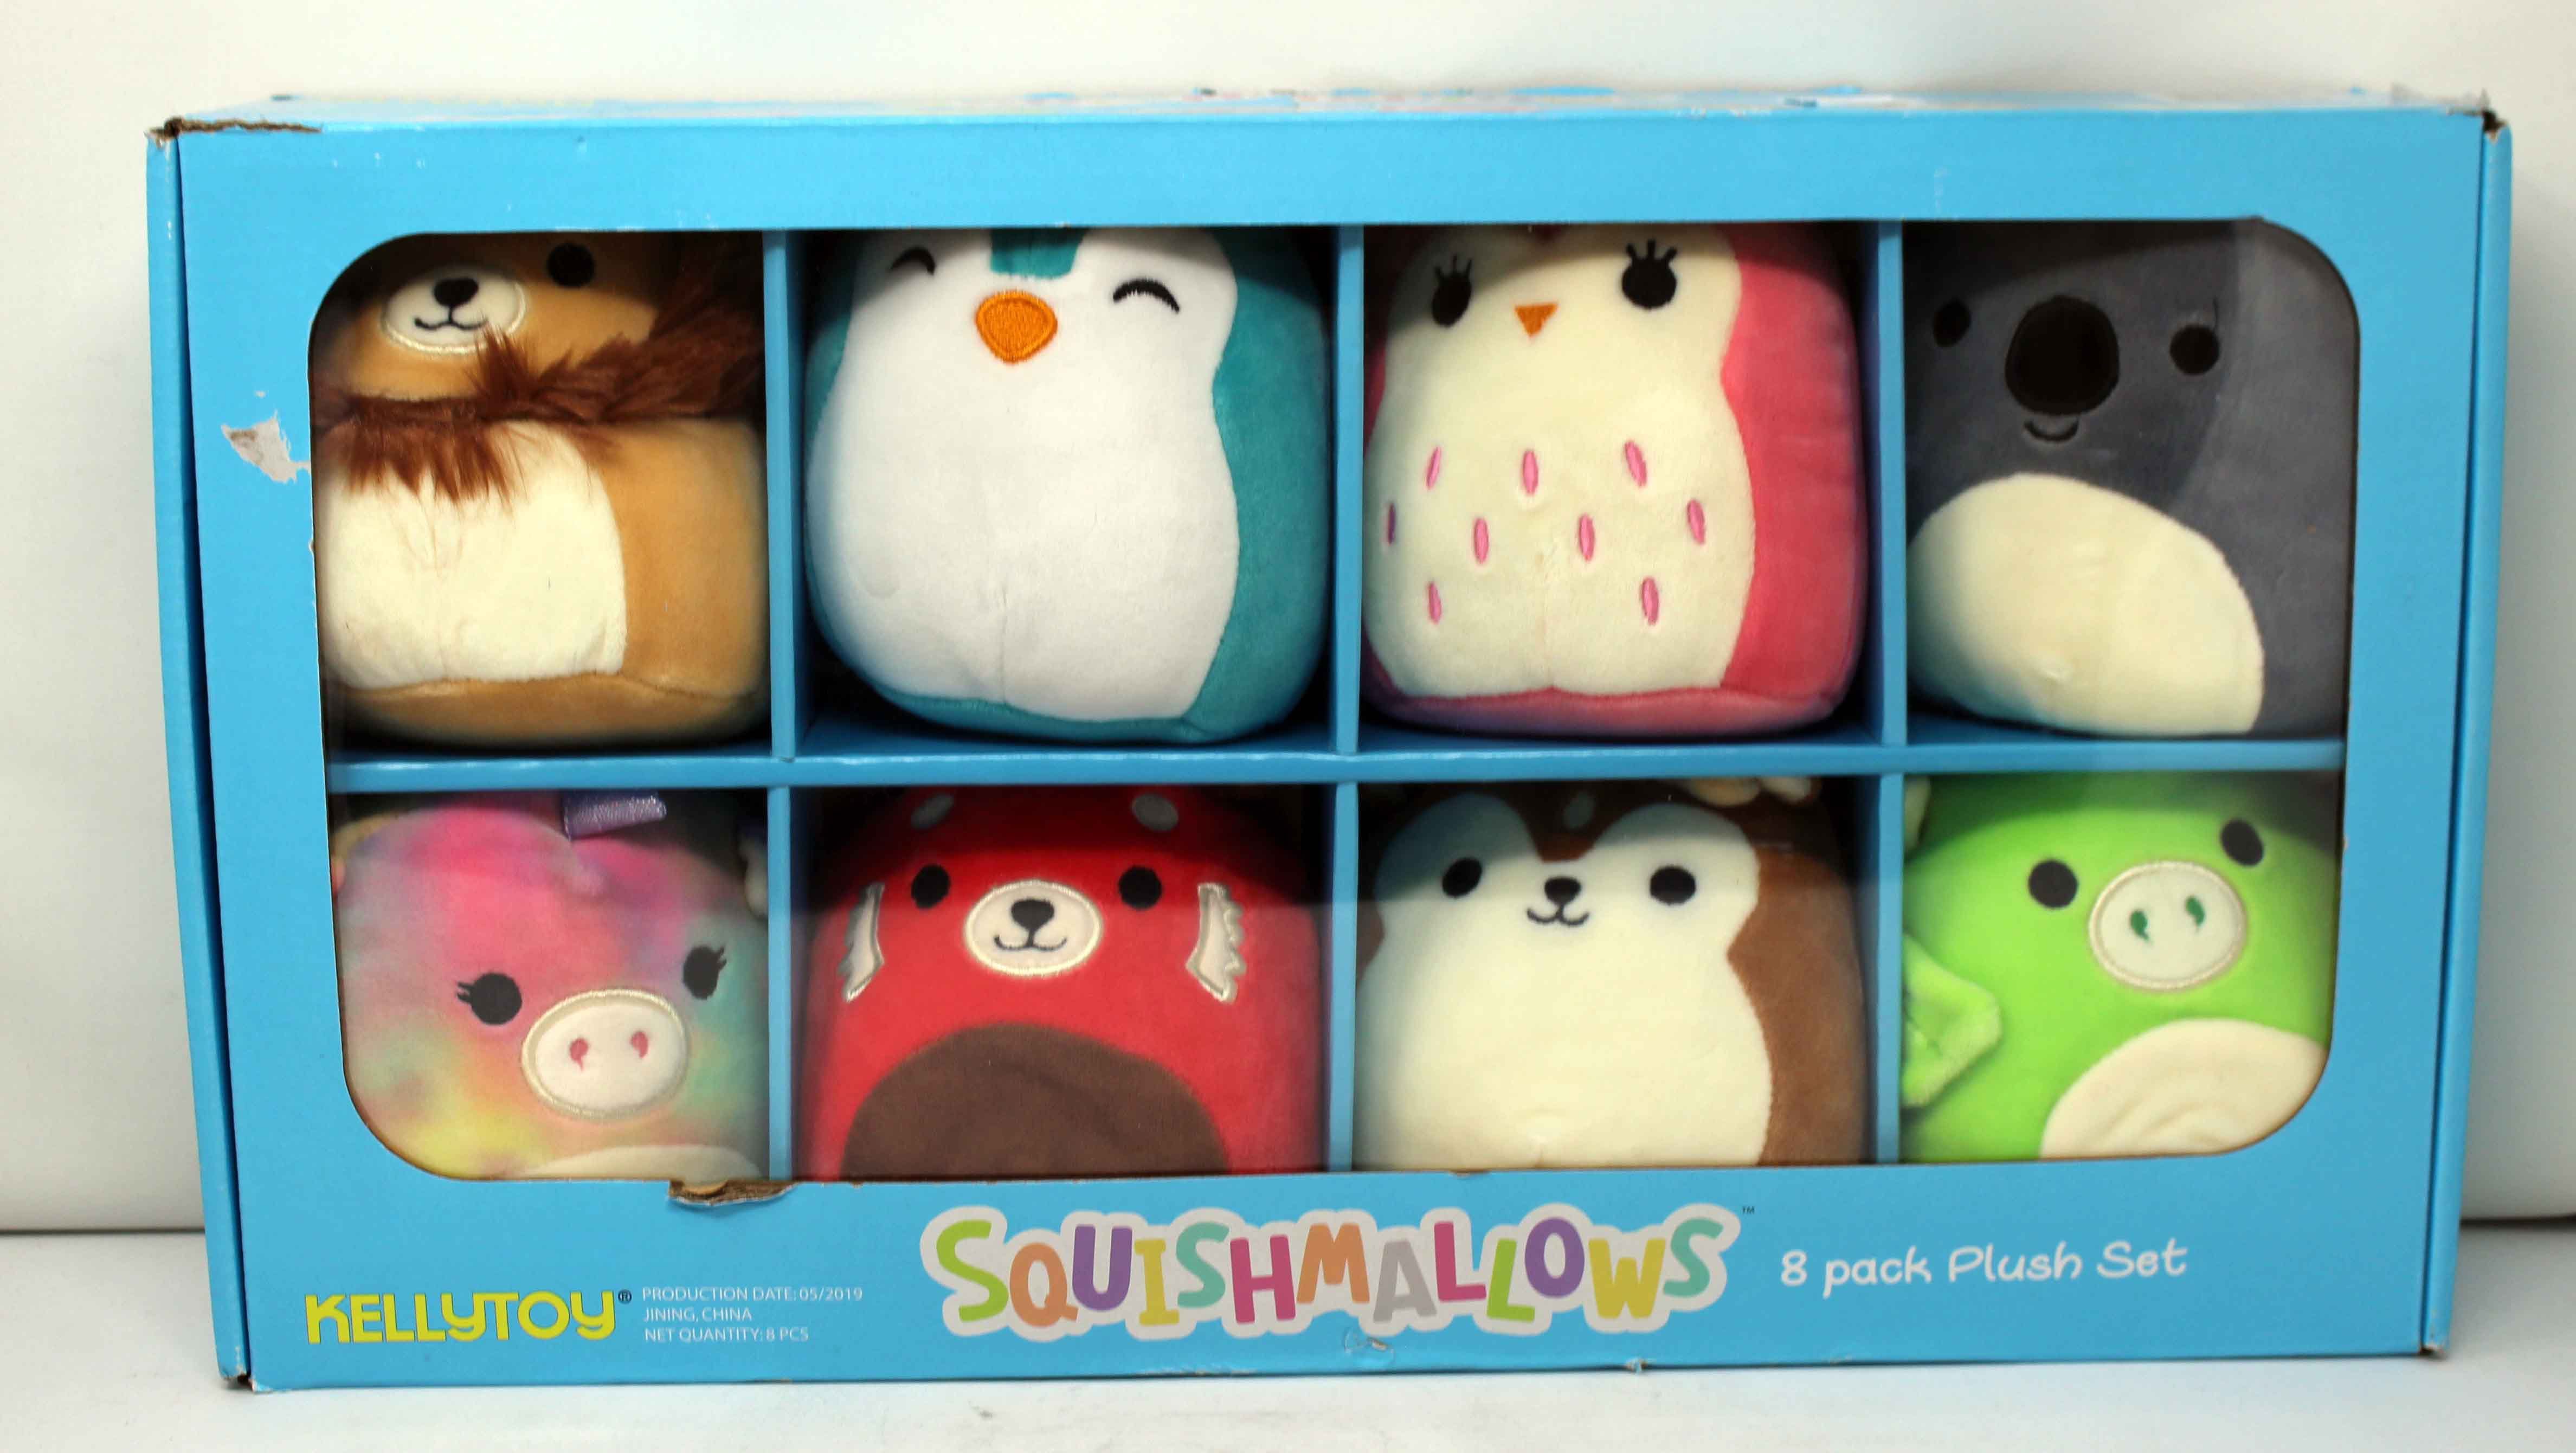 An 8 pack Squishmallows Plush Set with a variety of smaller 5 inch Squishmallows